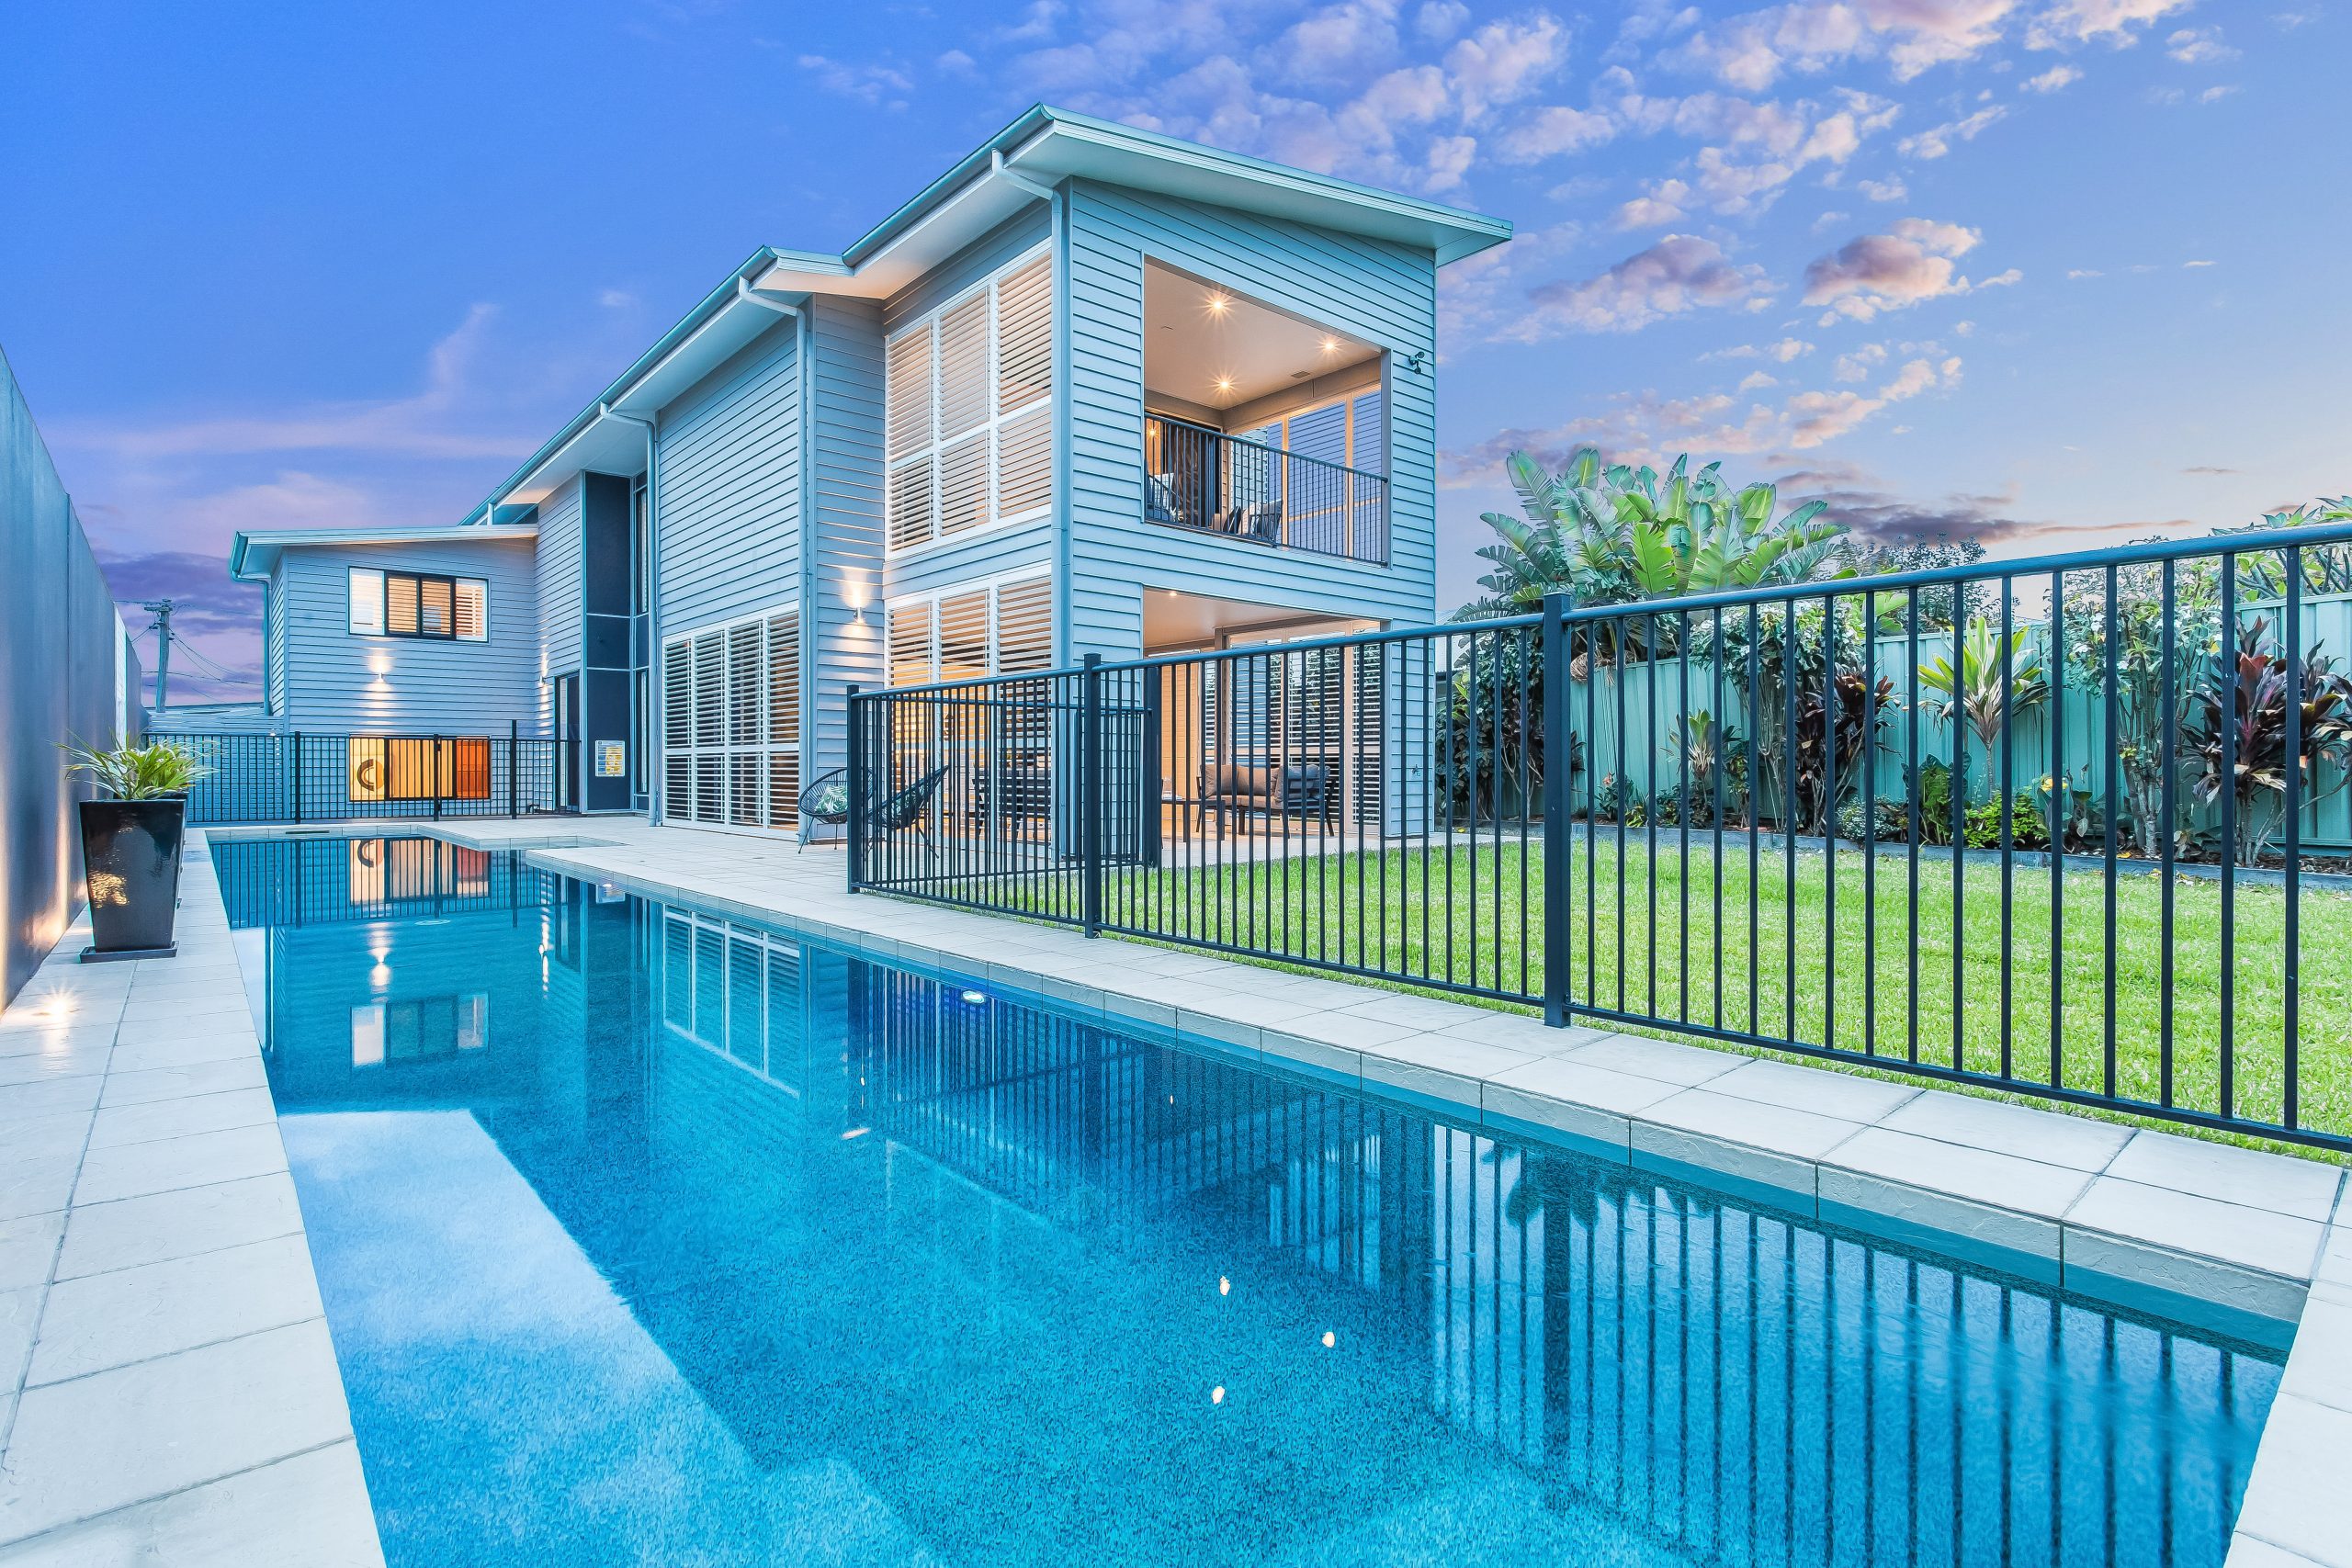 a large two storey blue house with fenced in swimming pool